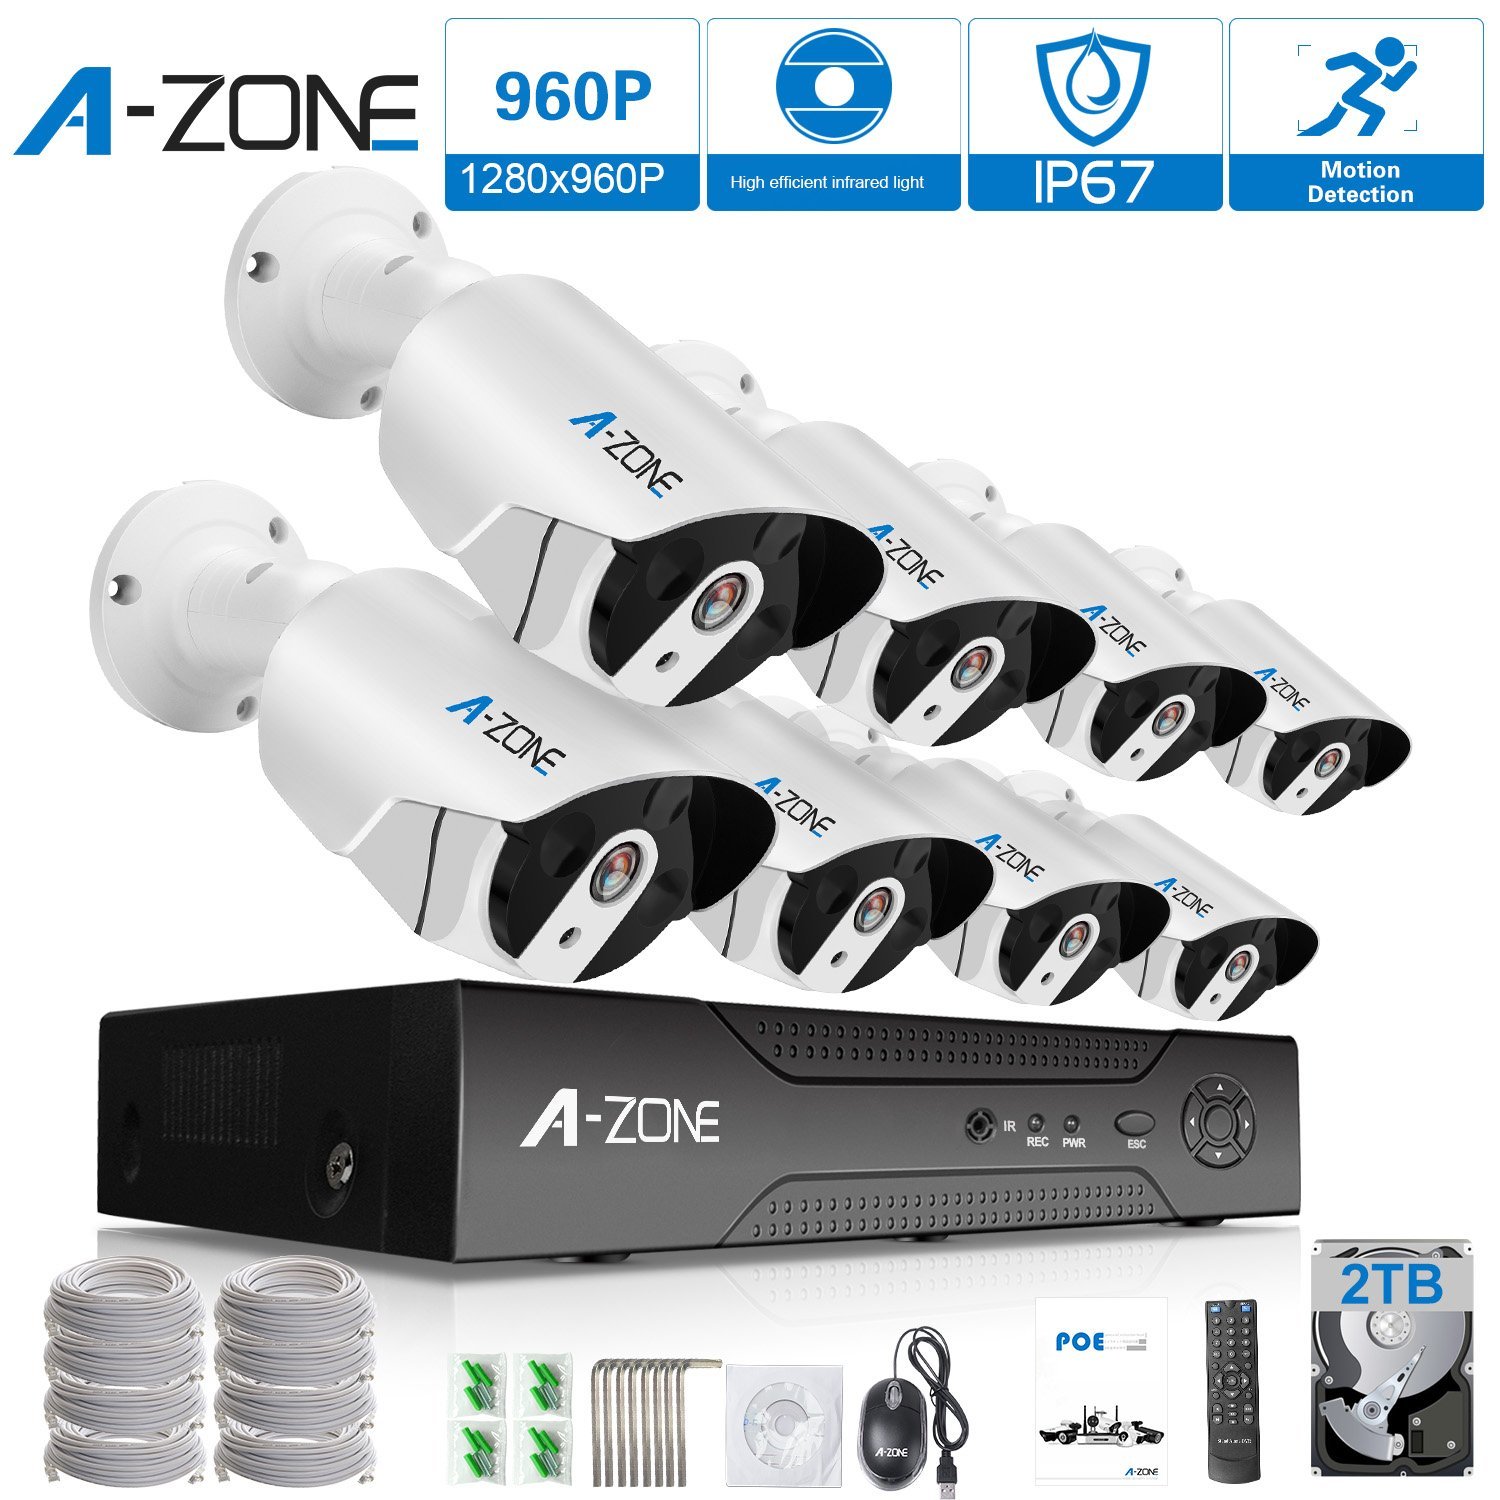 A-ZONE Security 1080p 8 Channel PoE IP Security Surveillance Camera System with 8 Outdoor/Indoor 1080P Security Camera Super HD Night Vision- No Hard Drive Free Remote View Security Camera System 